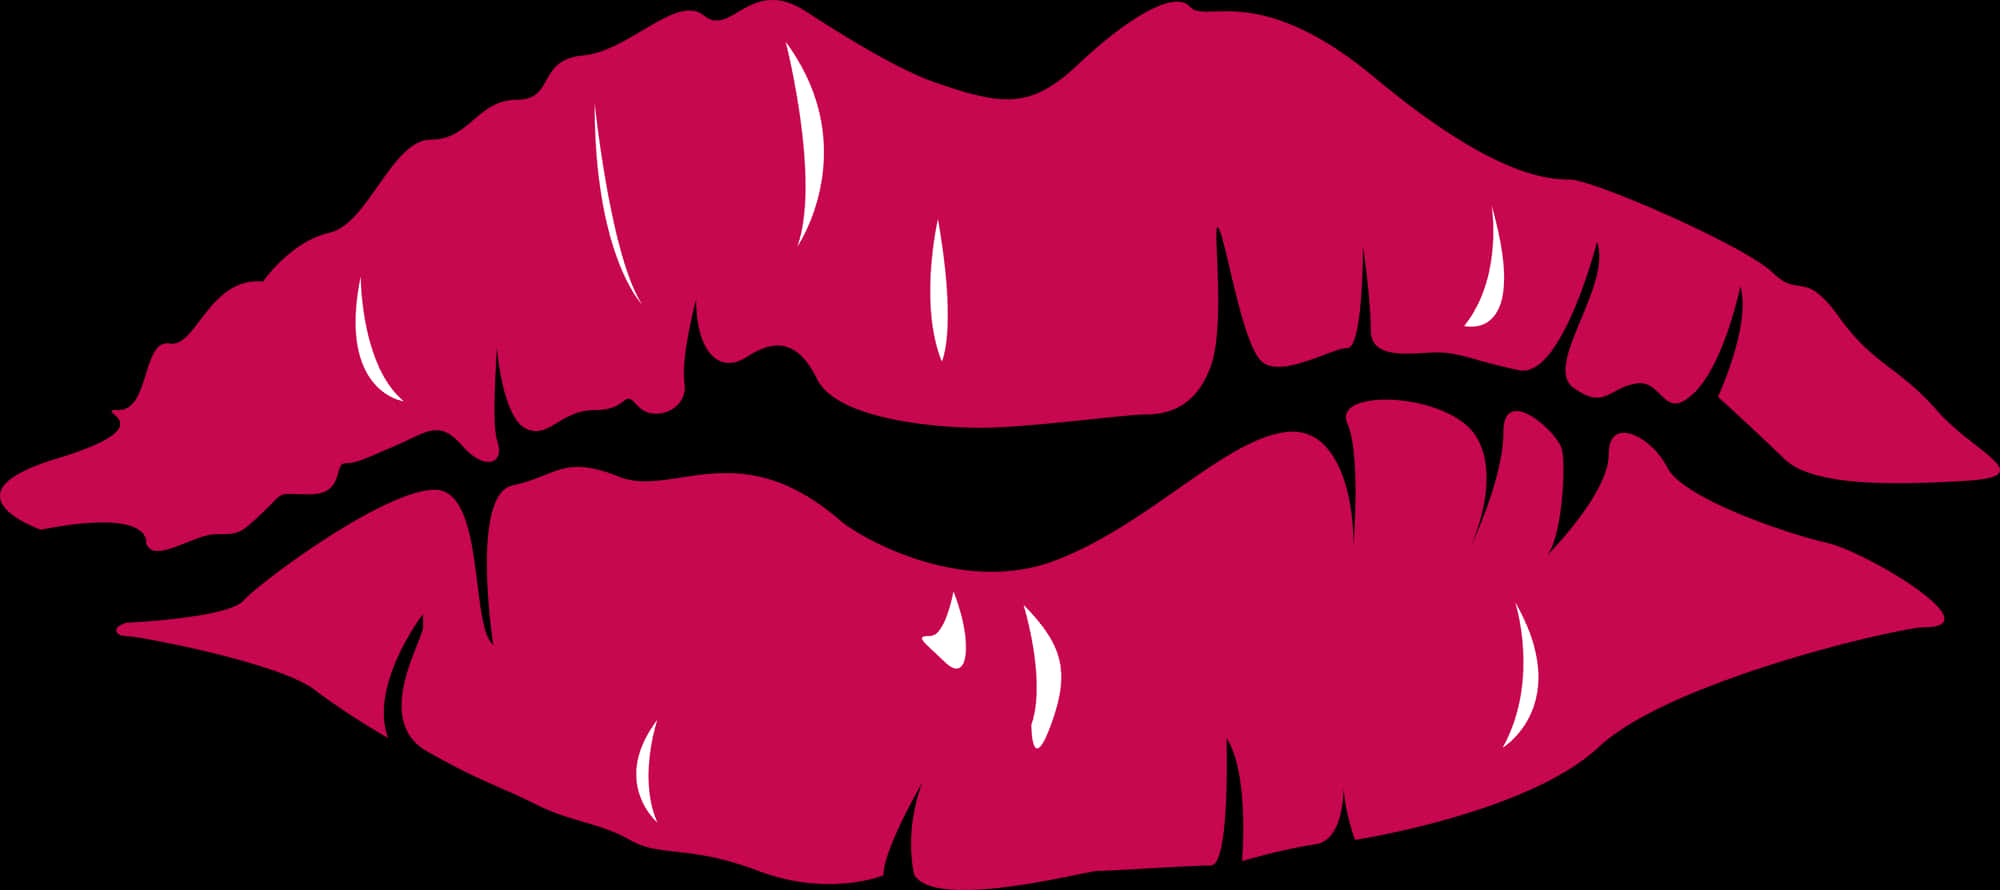 A Pink Lips With Black Background